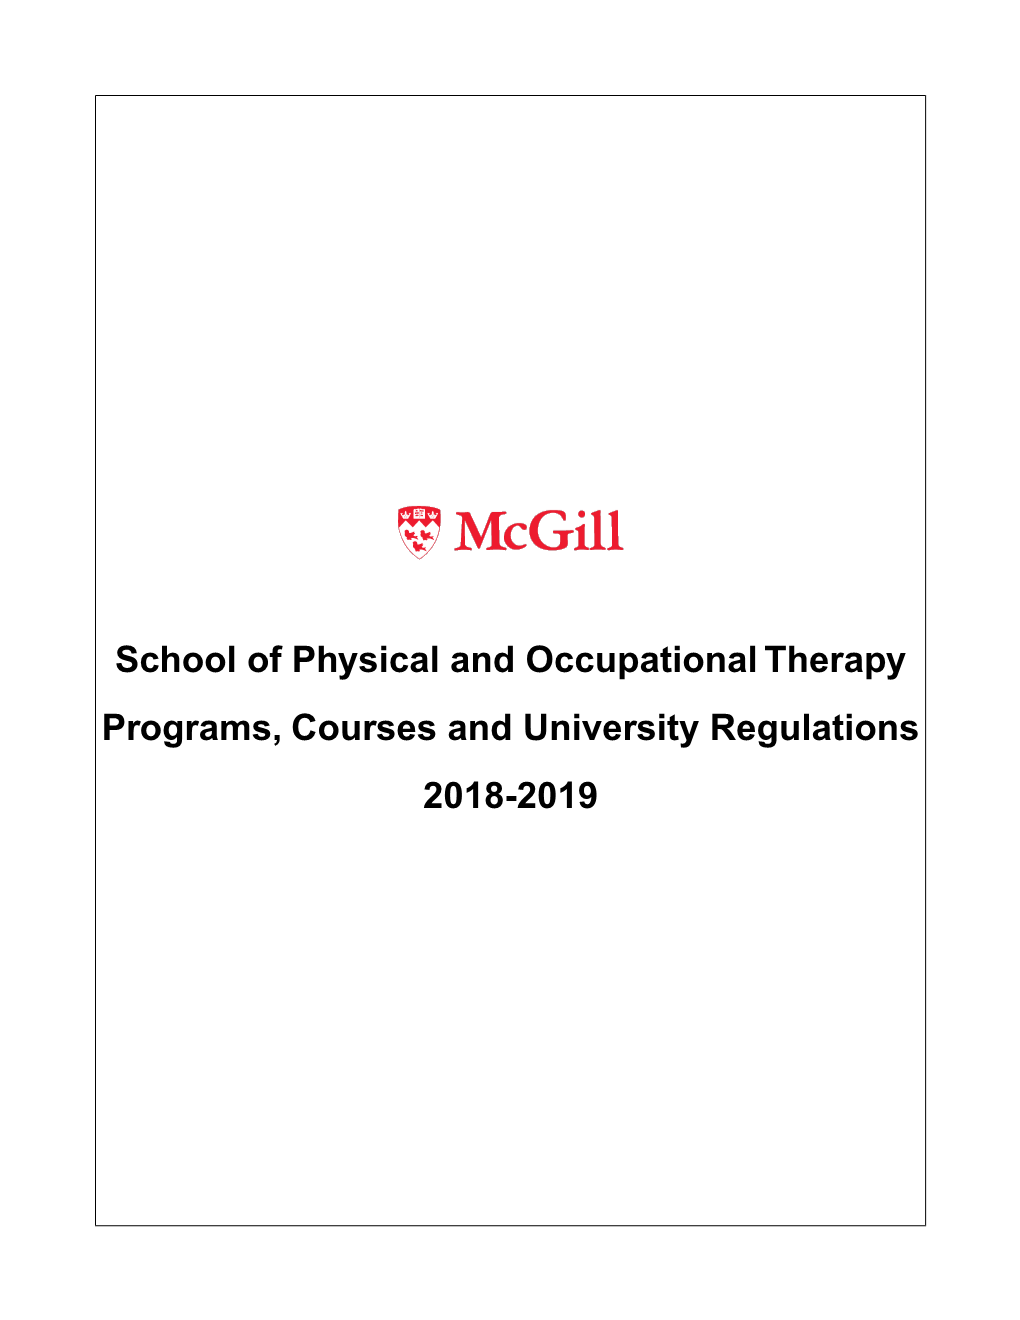 School of Physical and Occupational Therapy Programs, Courses and University Regulations 2018-2019